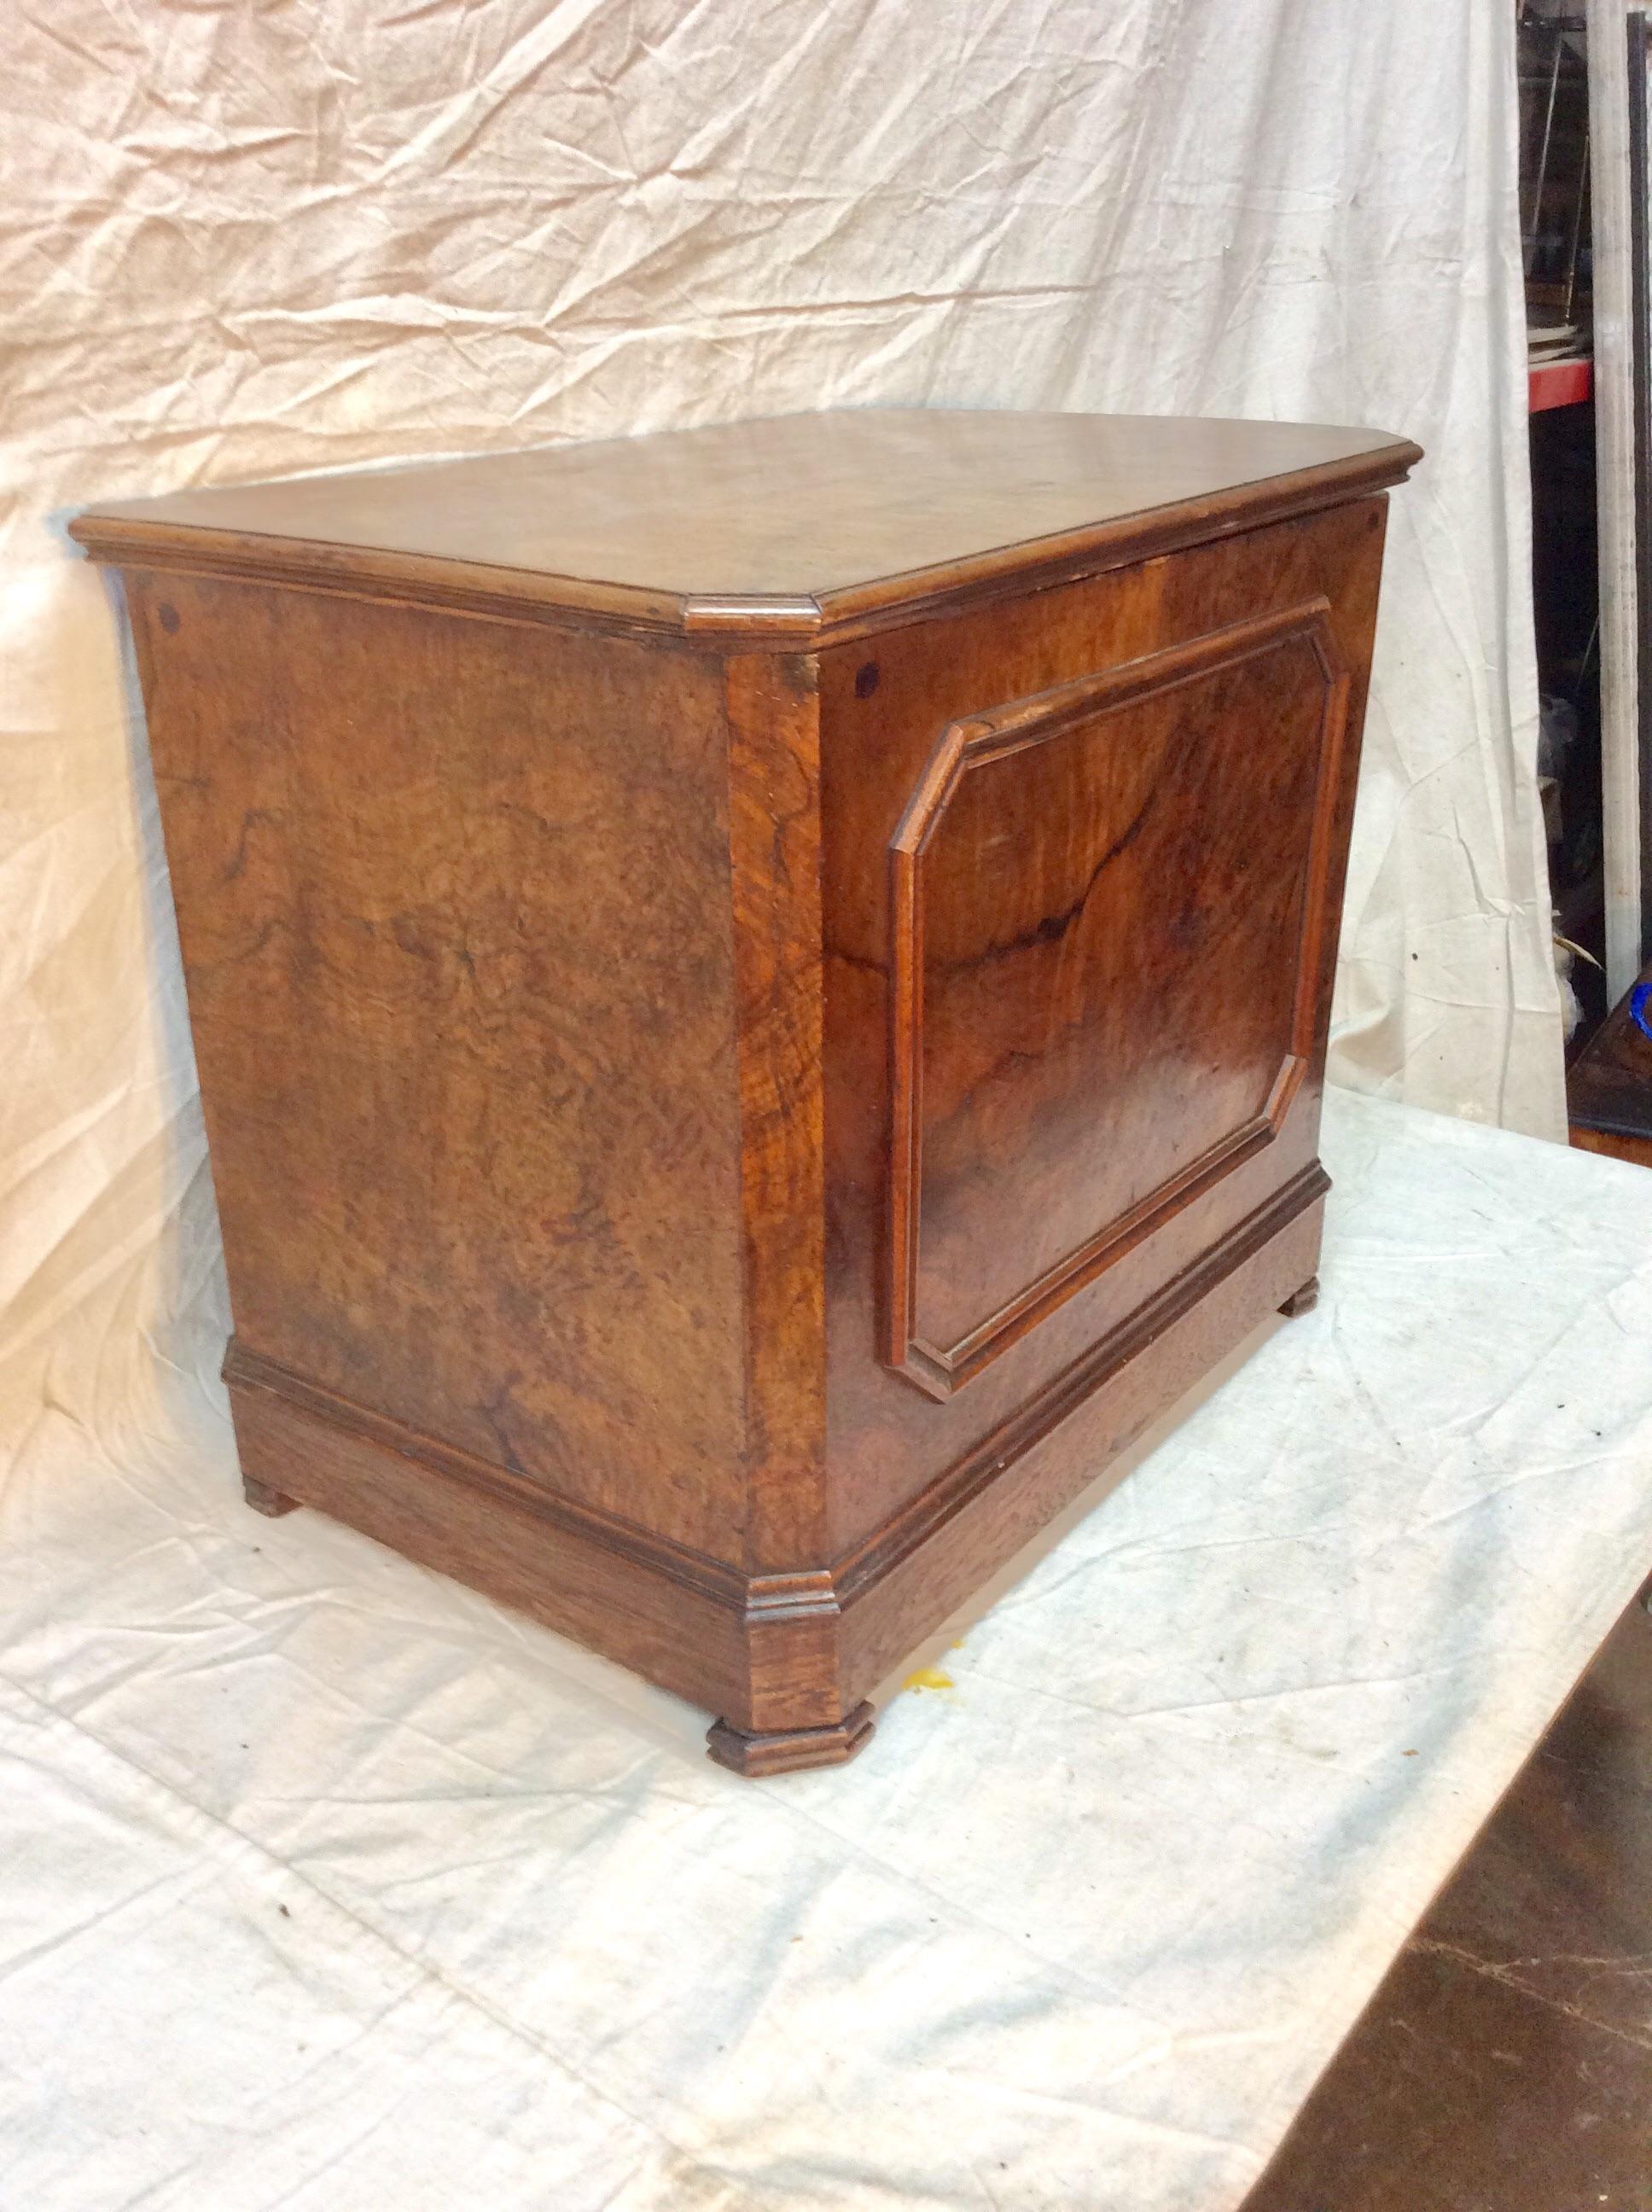 Found in the South if France this Late 19th century French Burlwood Trunk is rectangular in shape and features a beautiful patina. The top opens to reveal a partitioned interior and a hook to hold the piece open. With its clean lines and burlwood